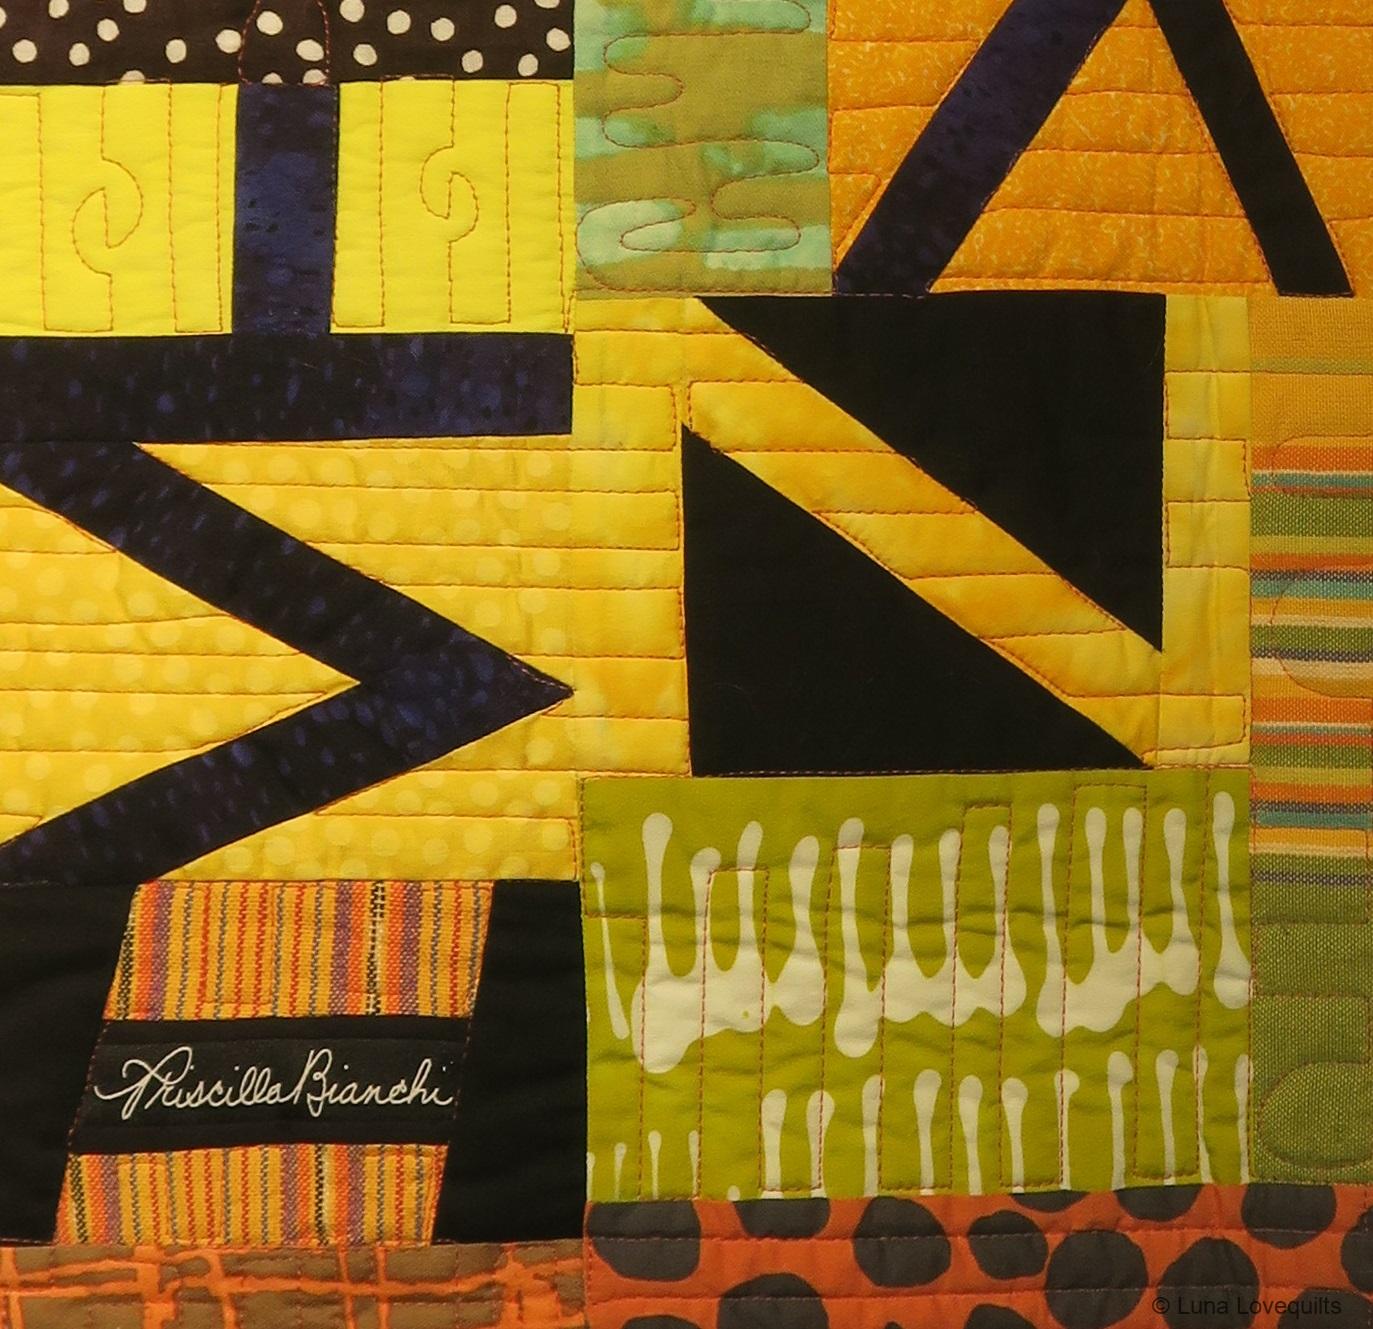 Spelling A-R-T in Yellow Kanji - Quilt by Priscilla Bianchi - Detail